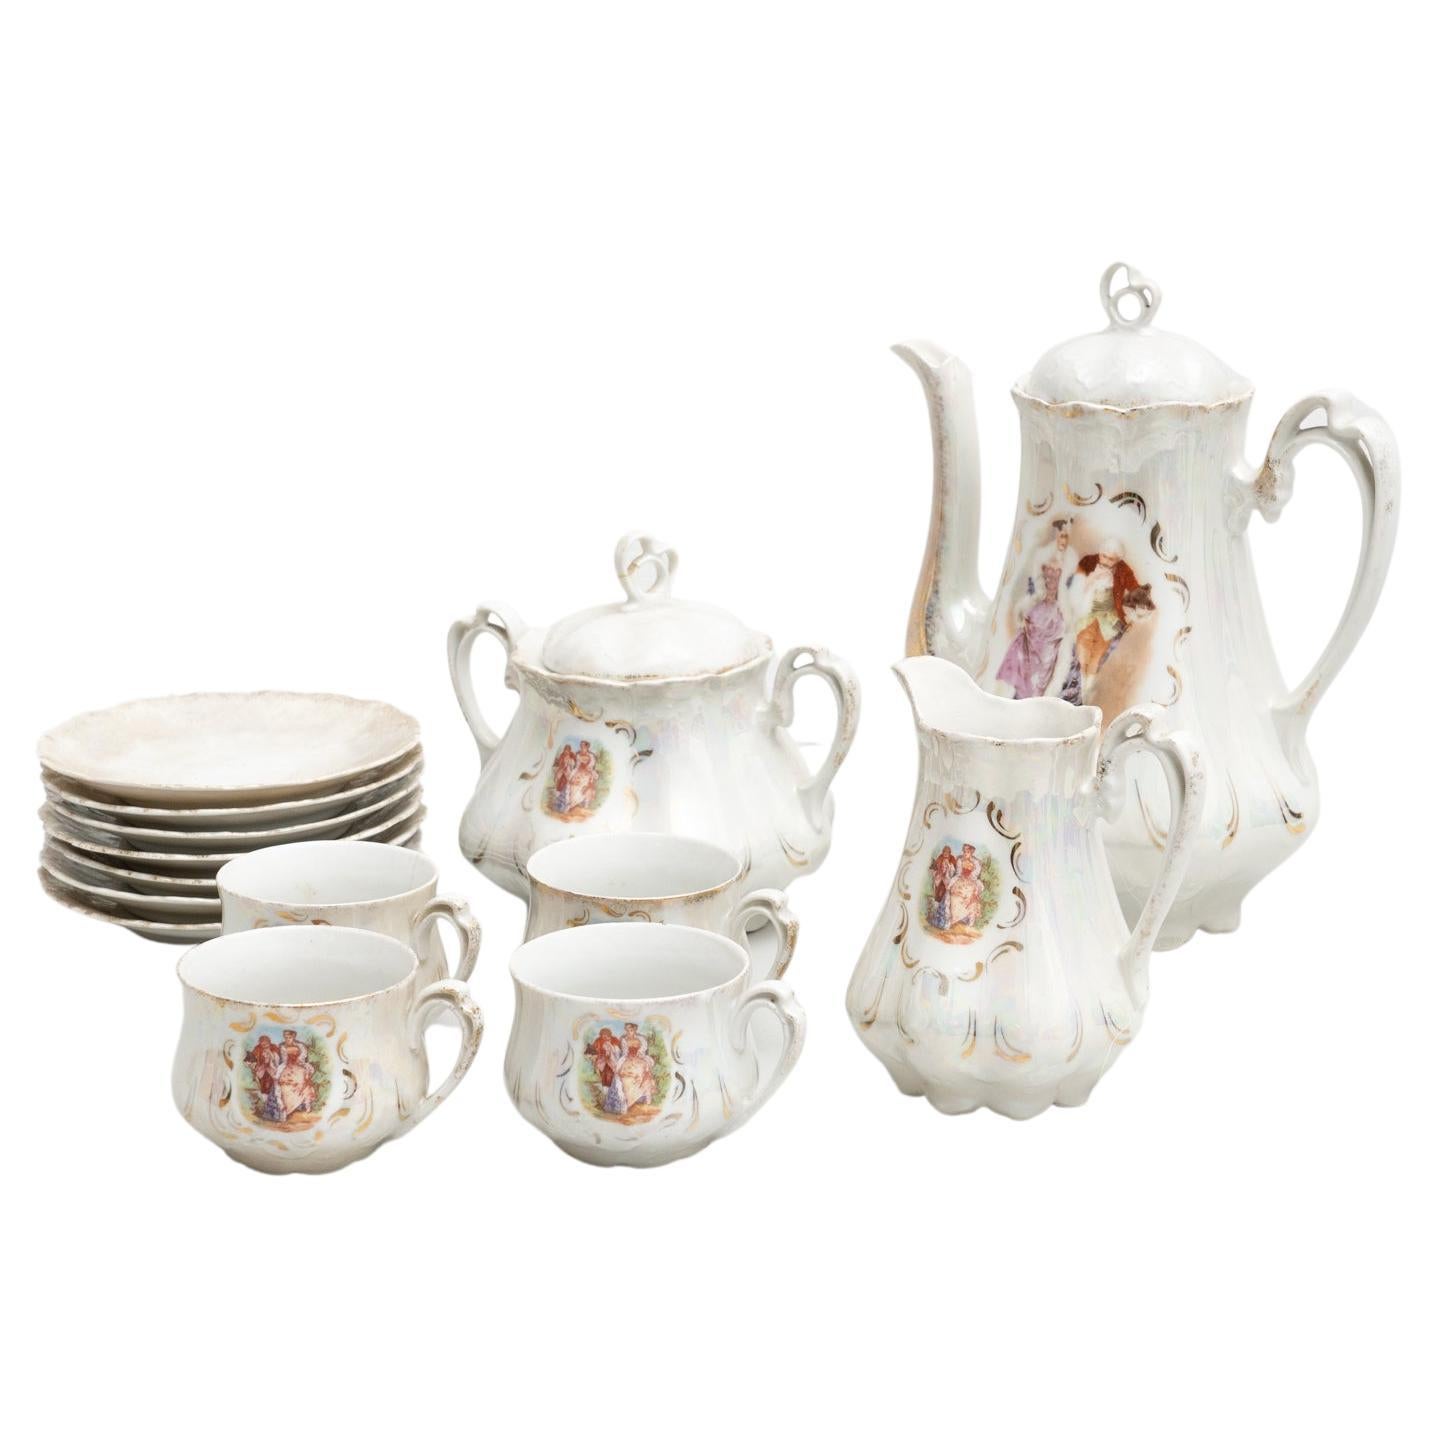 Traditional Antique French Porcelain Coffee Set of 14 Pieces, circa 1940